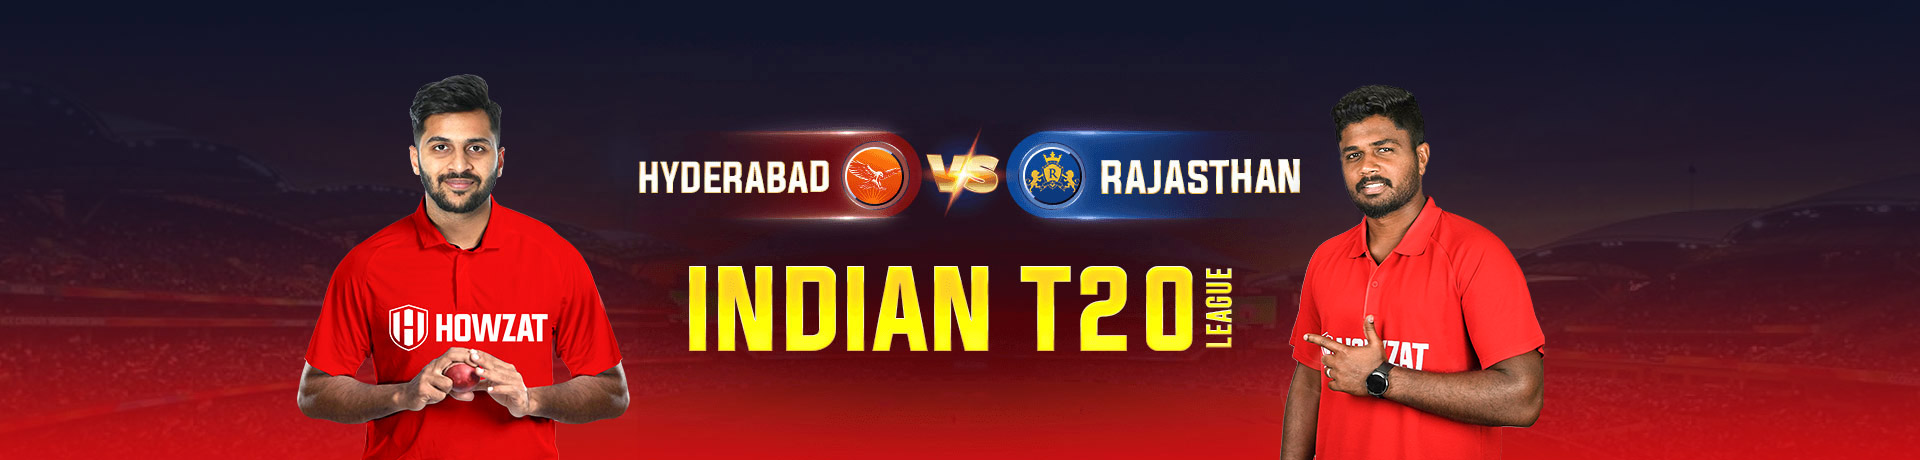 Hyderabad vs Rajasthan Indian T20 League